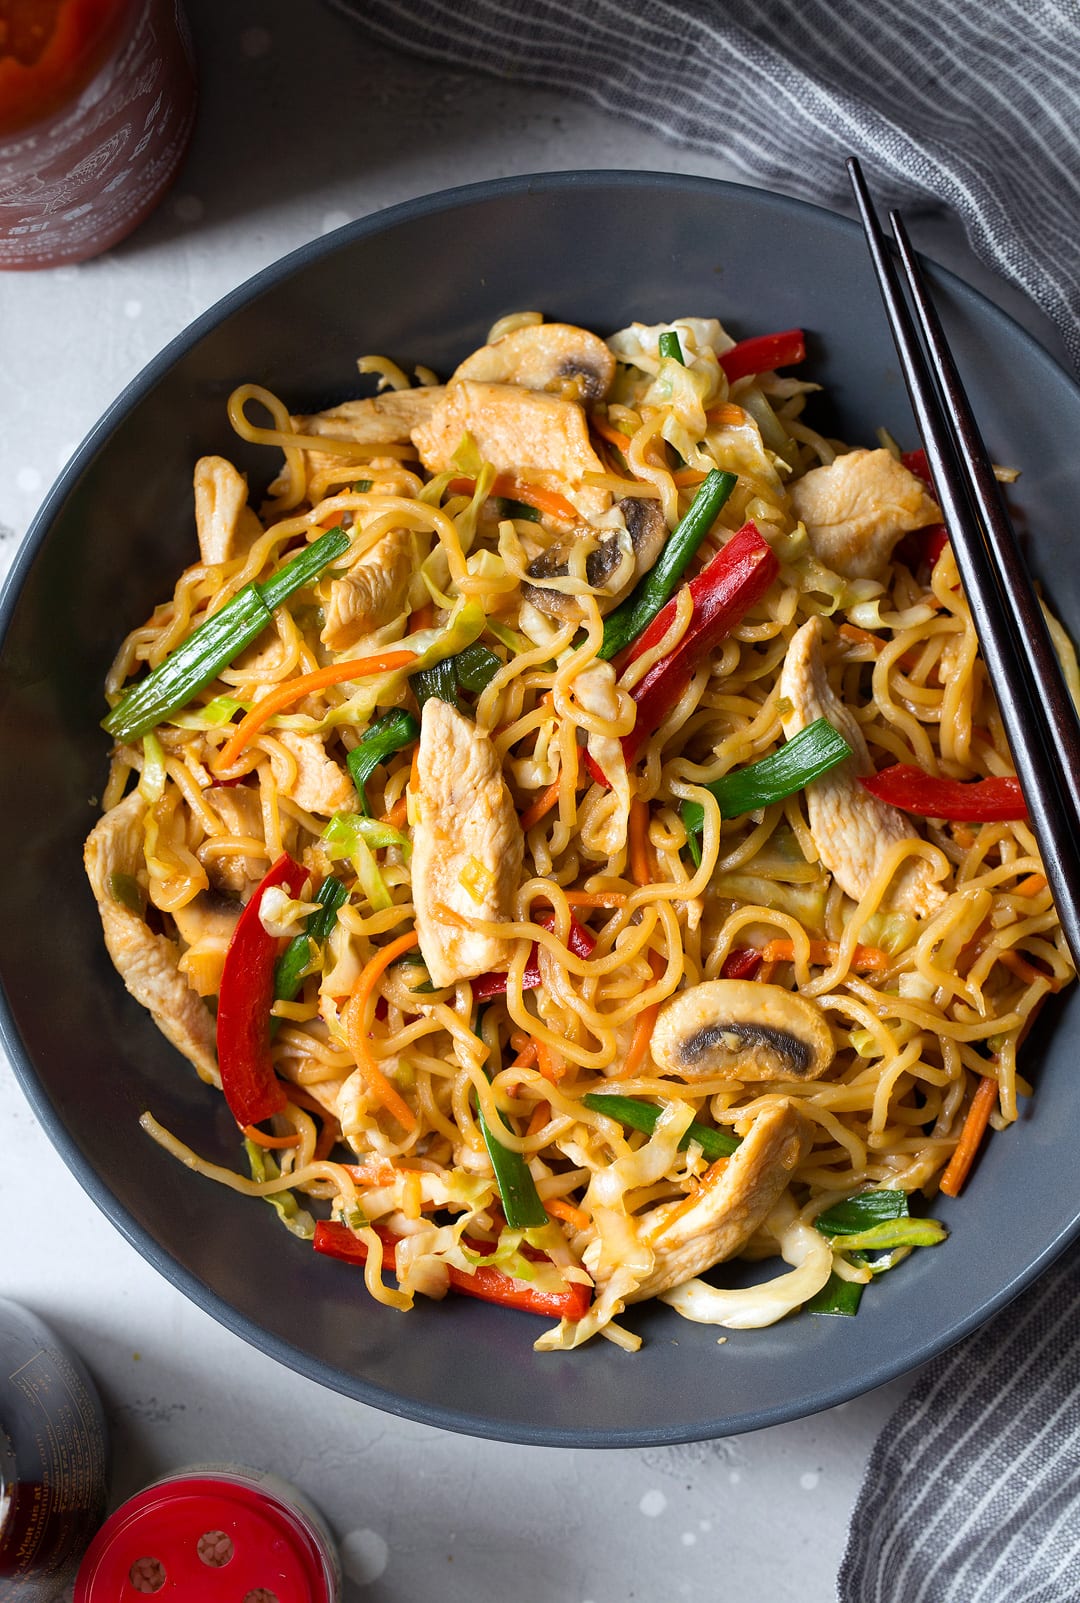 Chicken Yakisoba in gray bowl with chopsticks